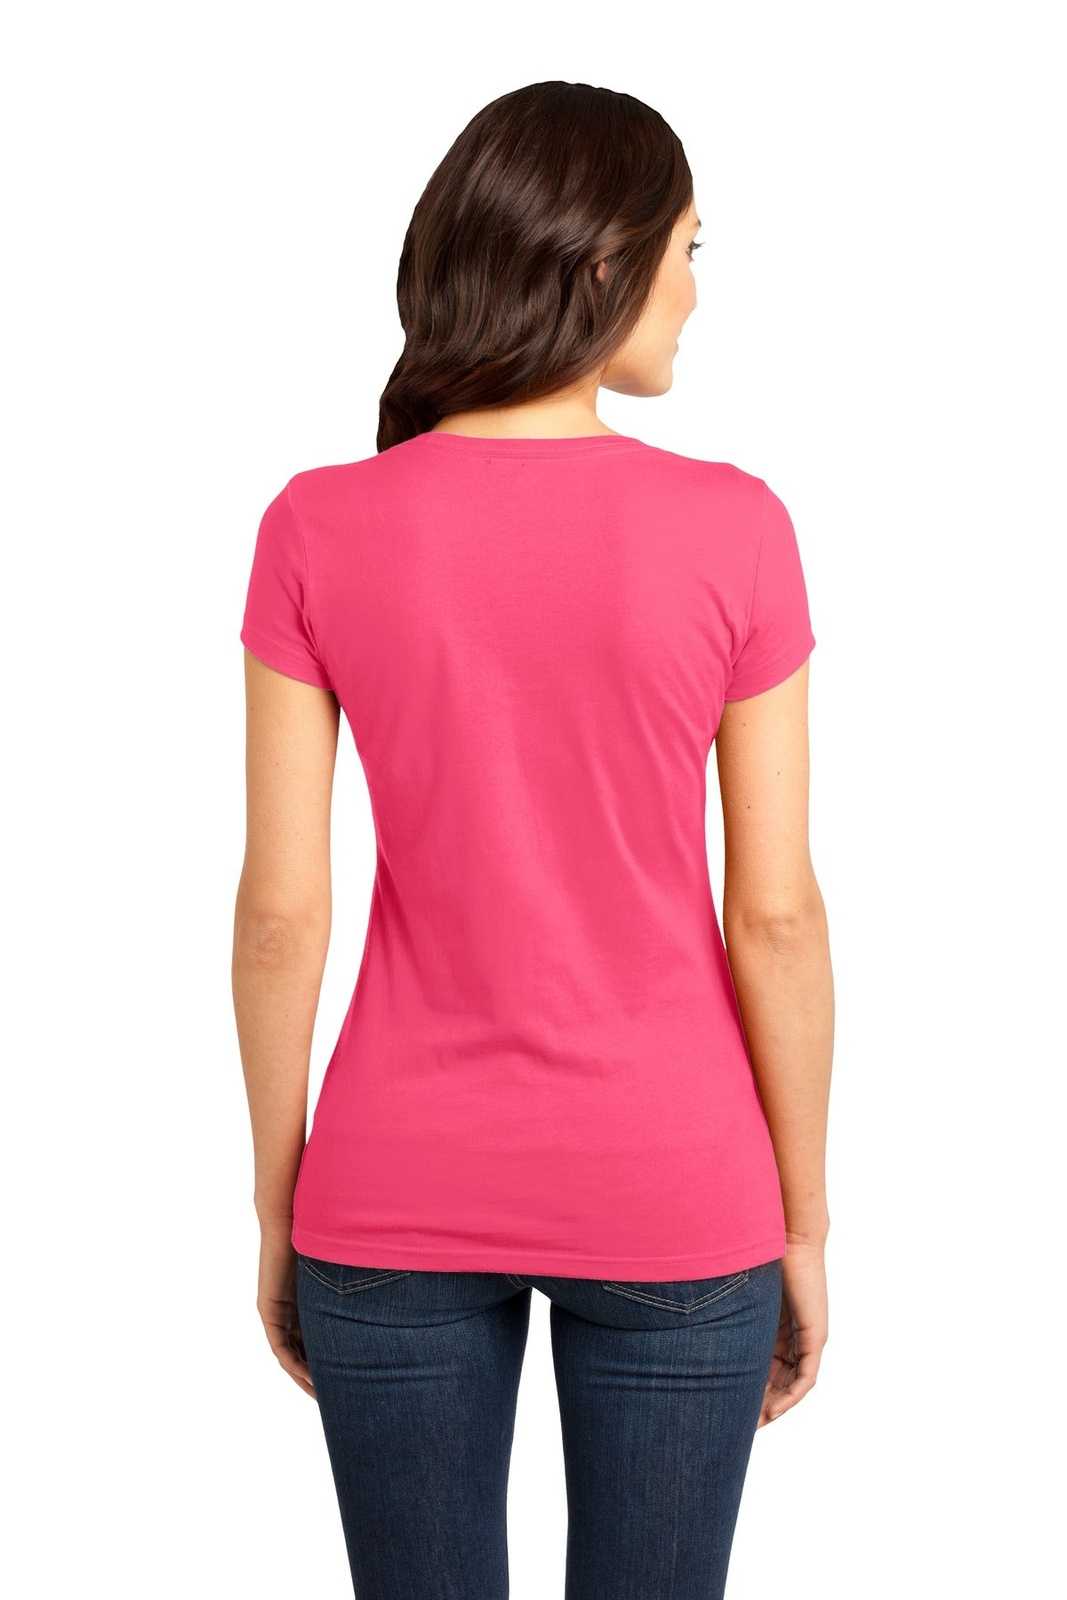 District DT6001 Women's Fitted Very Important Tee - Neon Pink - HIT a Double - 1